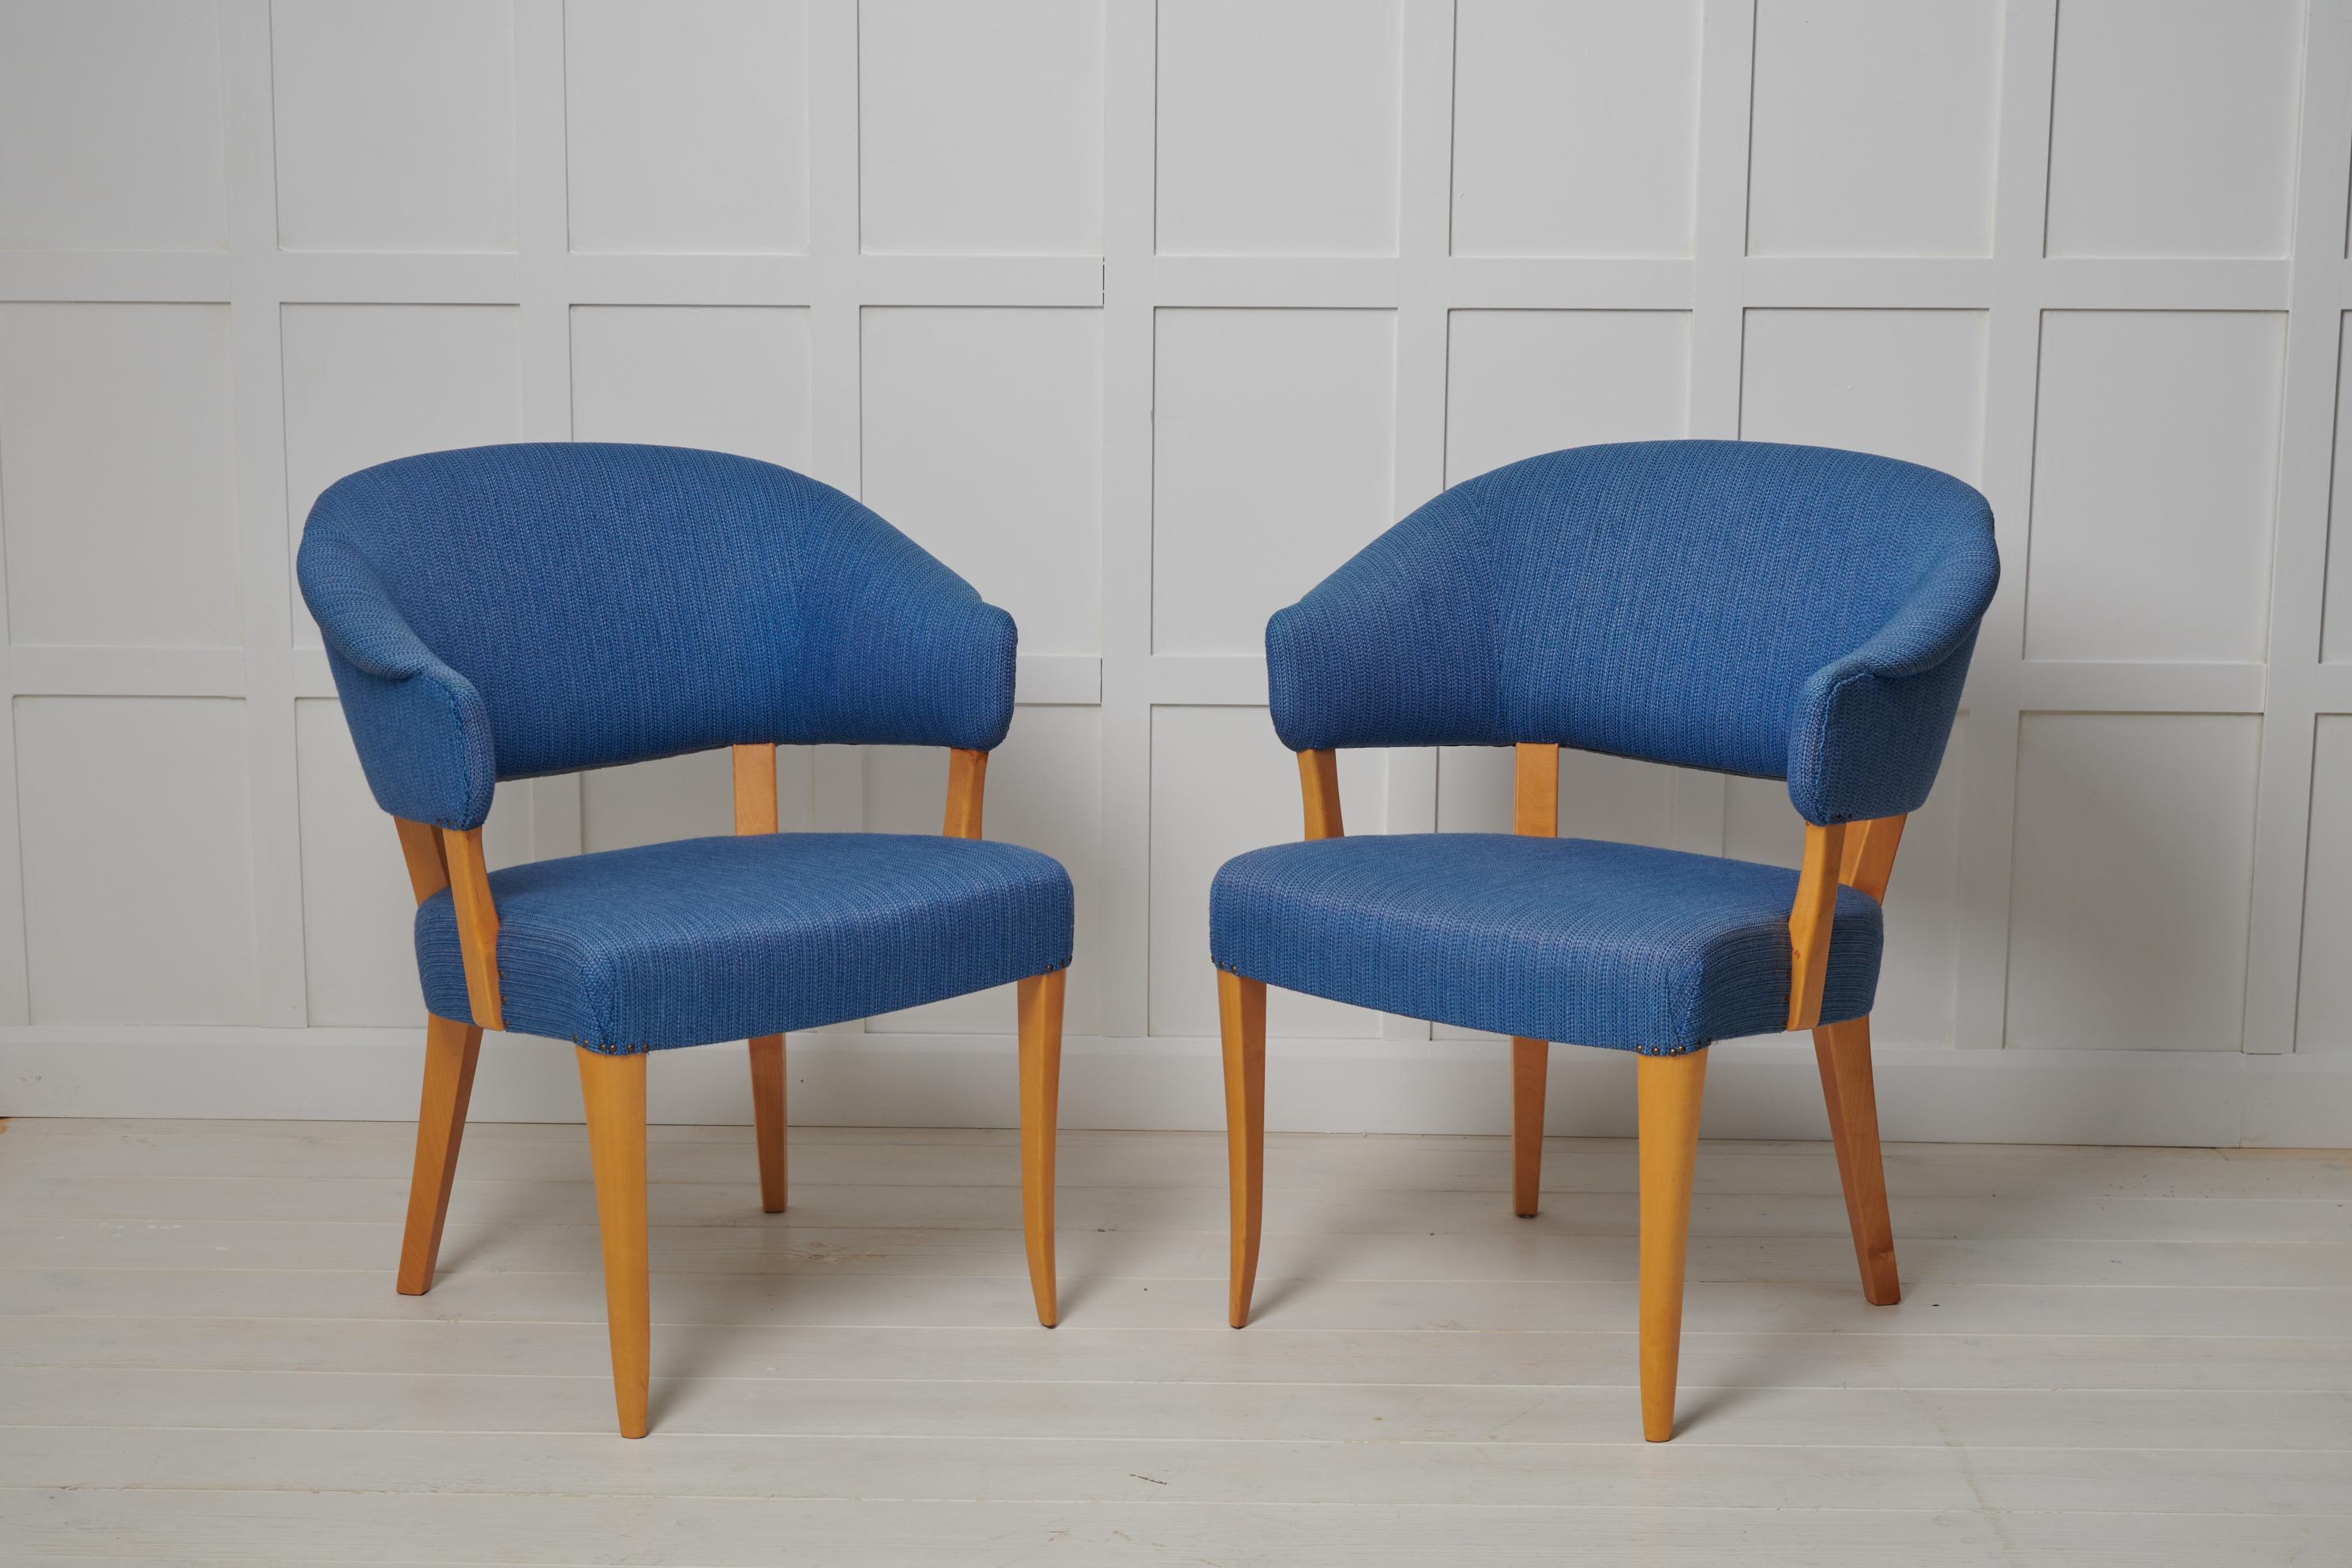 Scandinavian Modern by Carl Malmsten ”Lata Greven” Pair of Chairs  For Sale 1